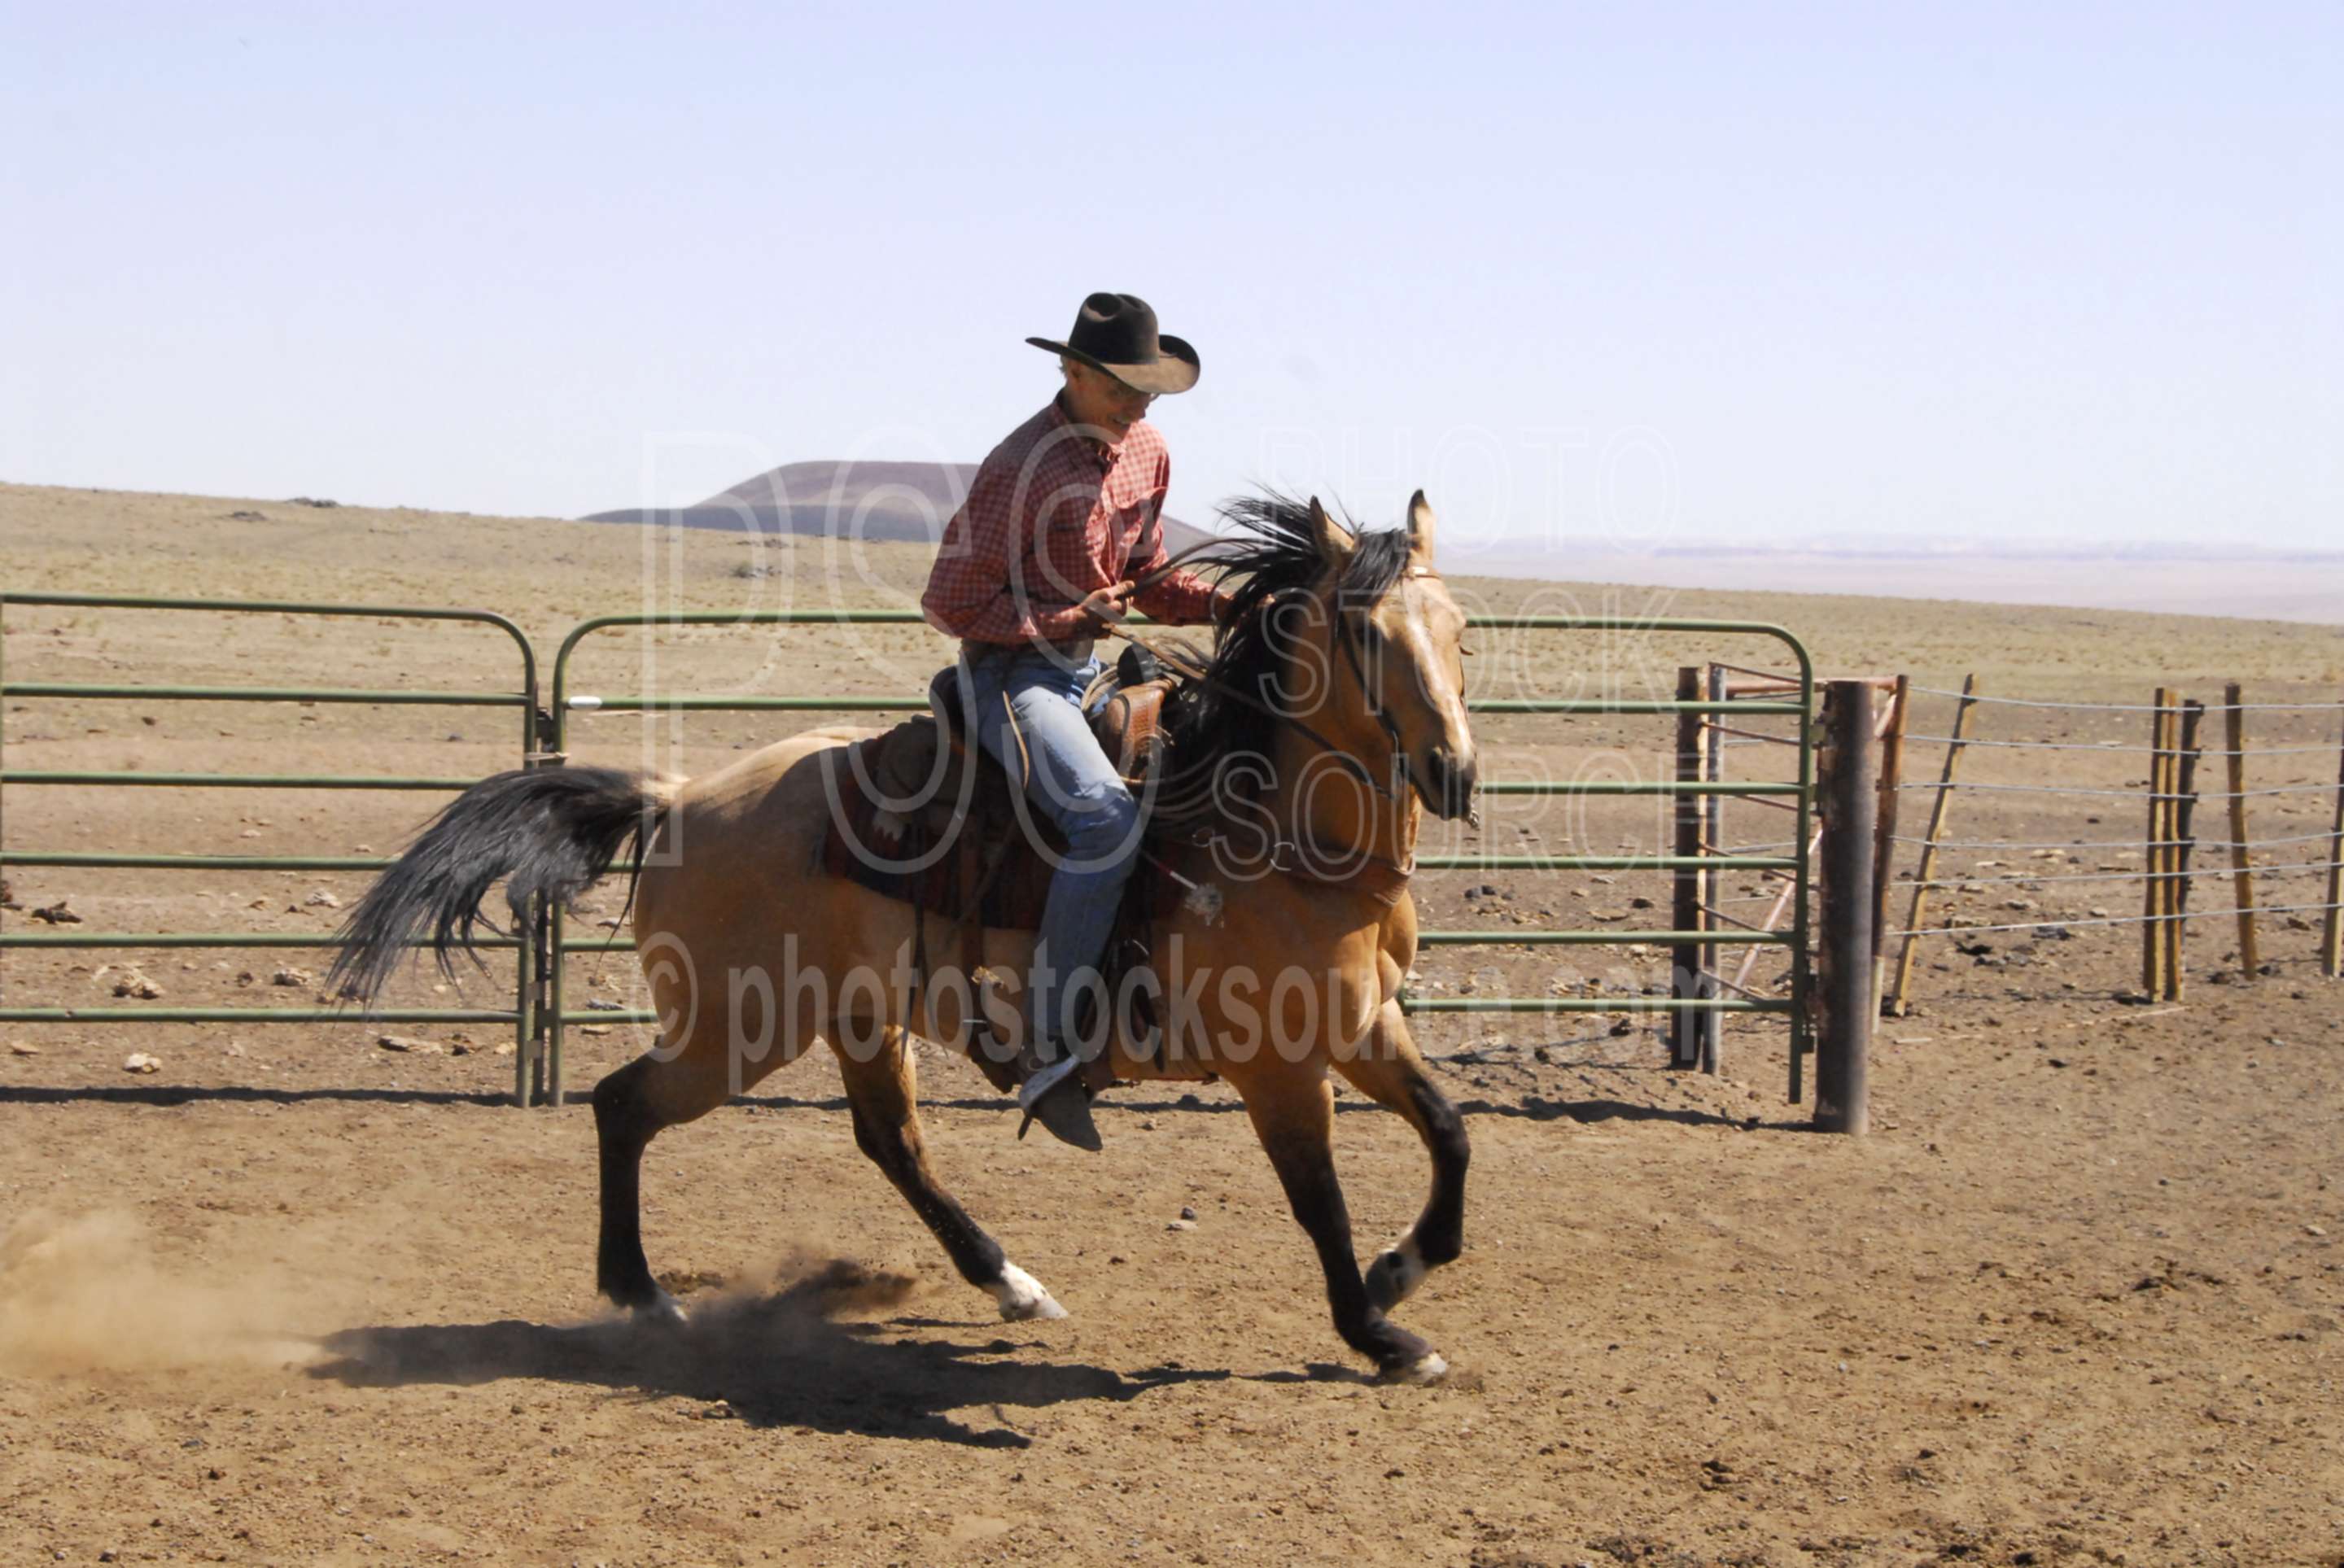 Cowboys Riding Horse,cowboy,walking cane ranch,cattle,riding,horse,barry